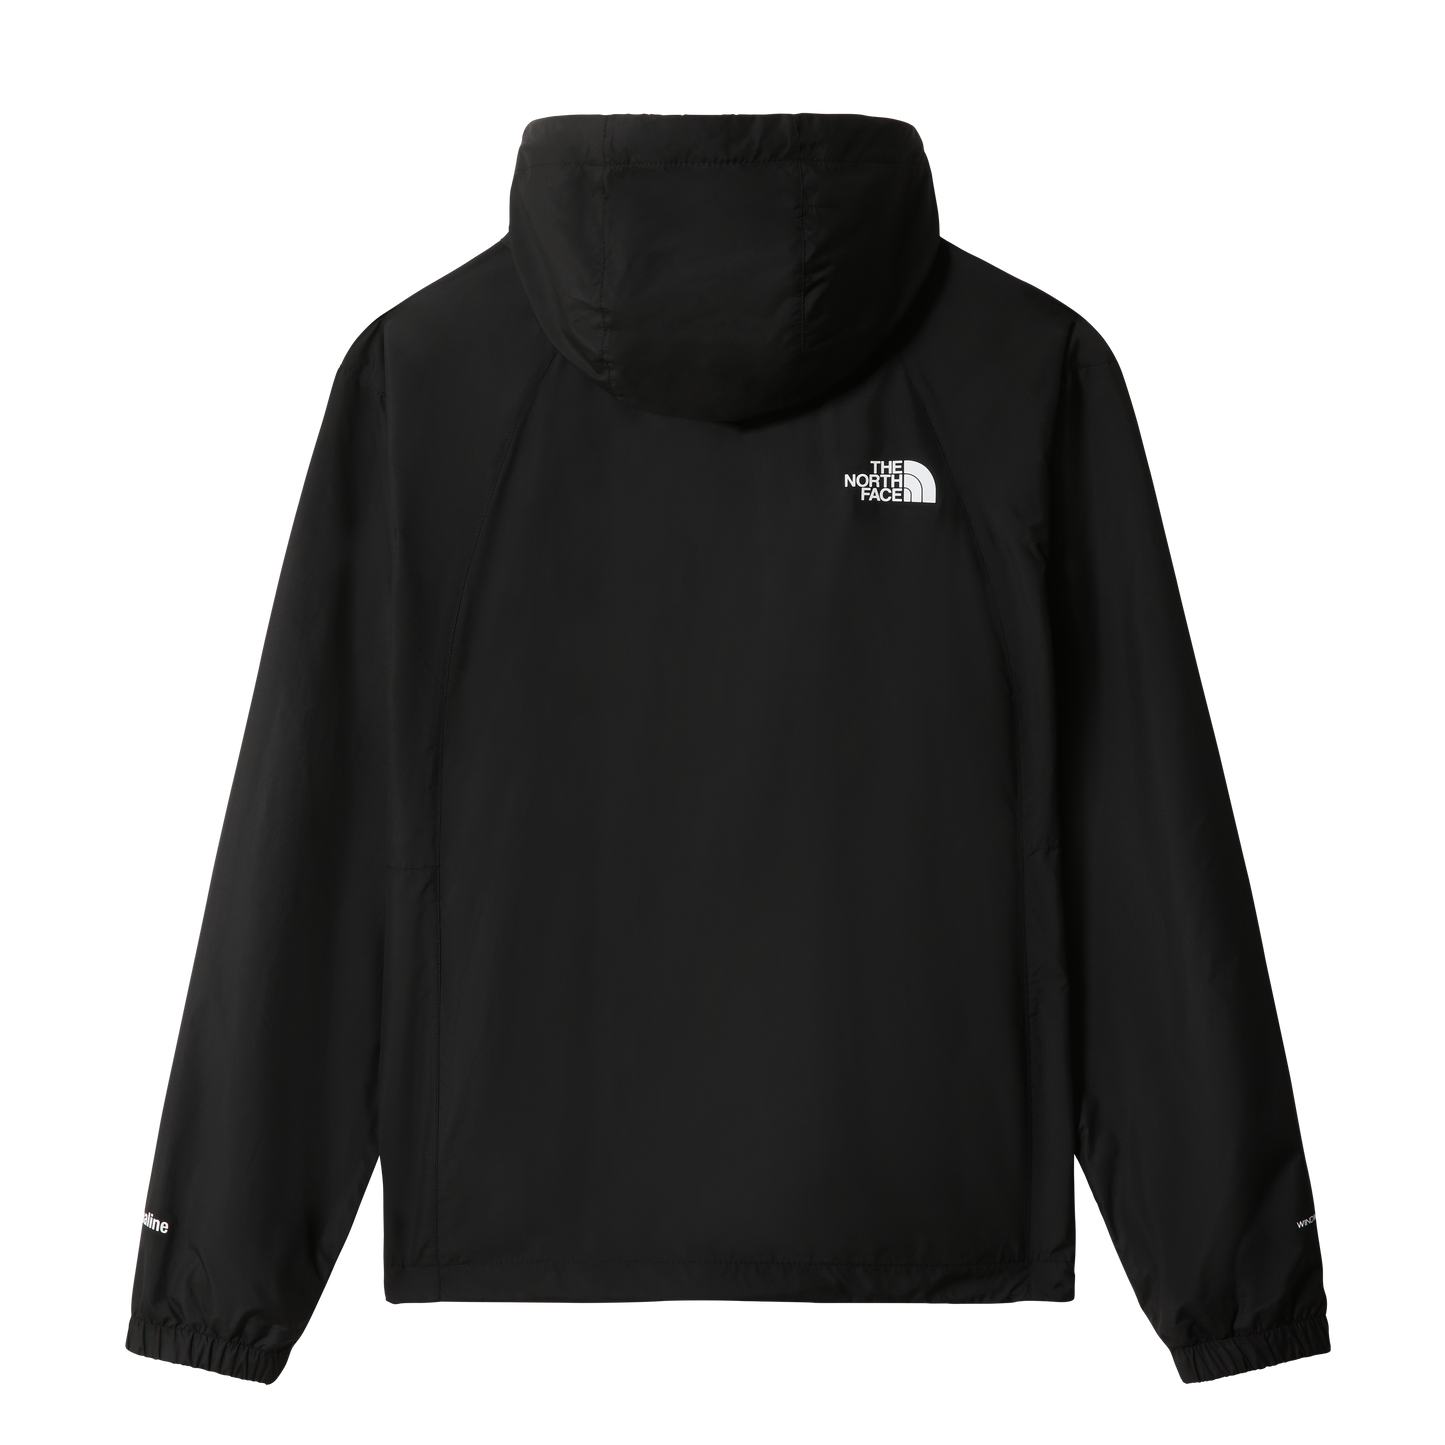 The North Face Hydrenaline Jacket